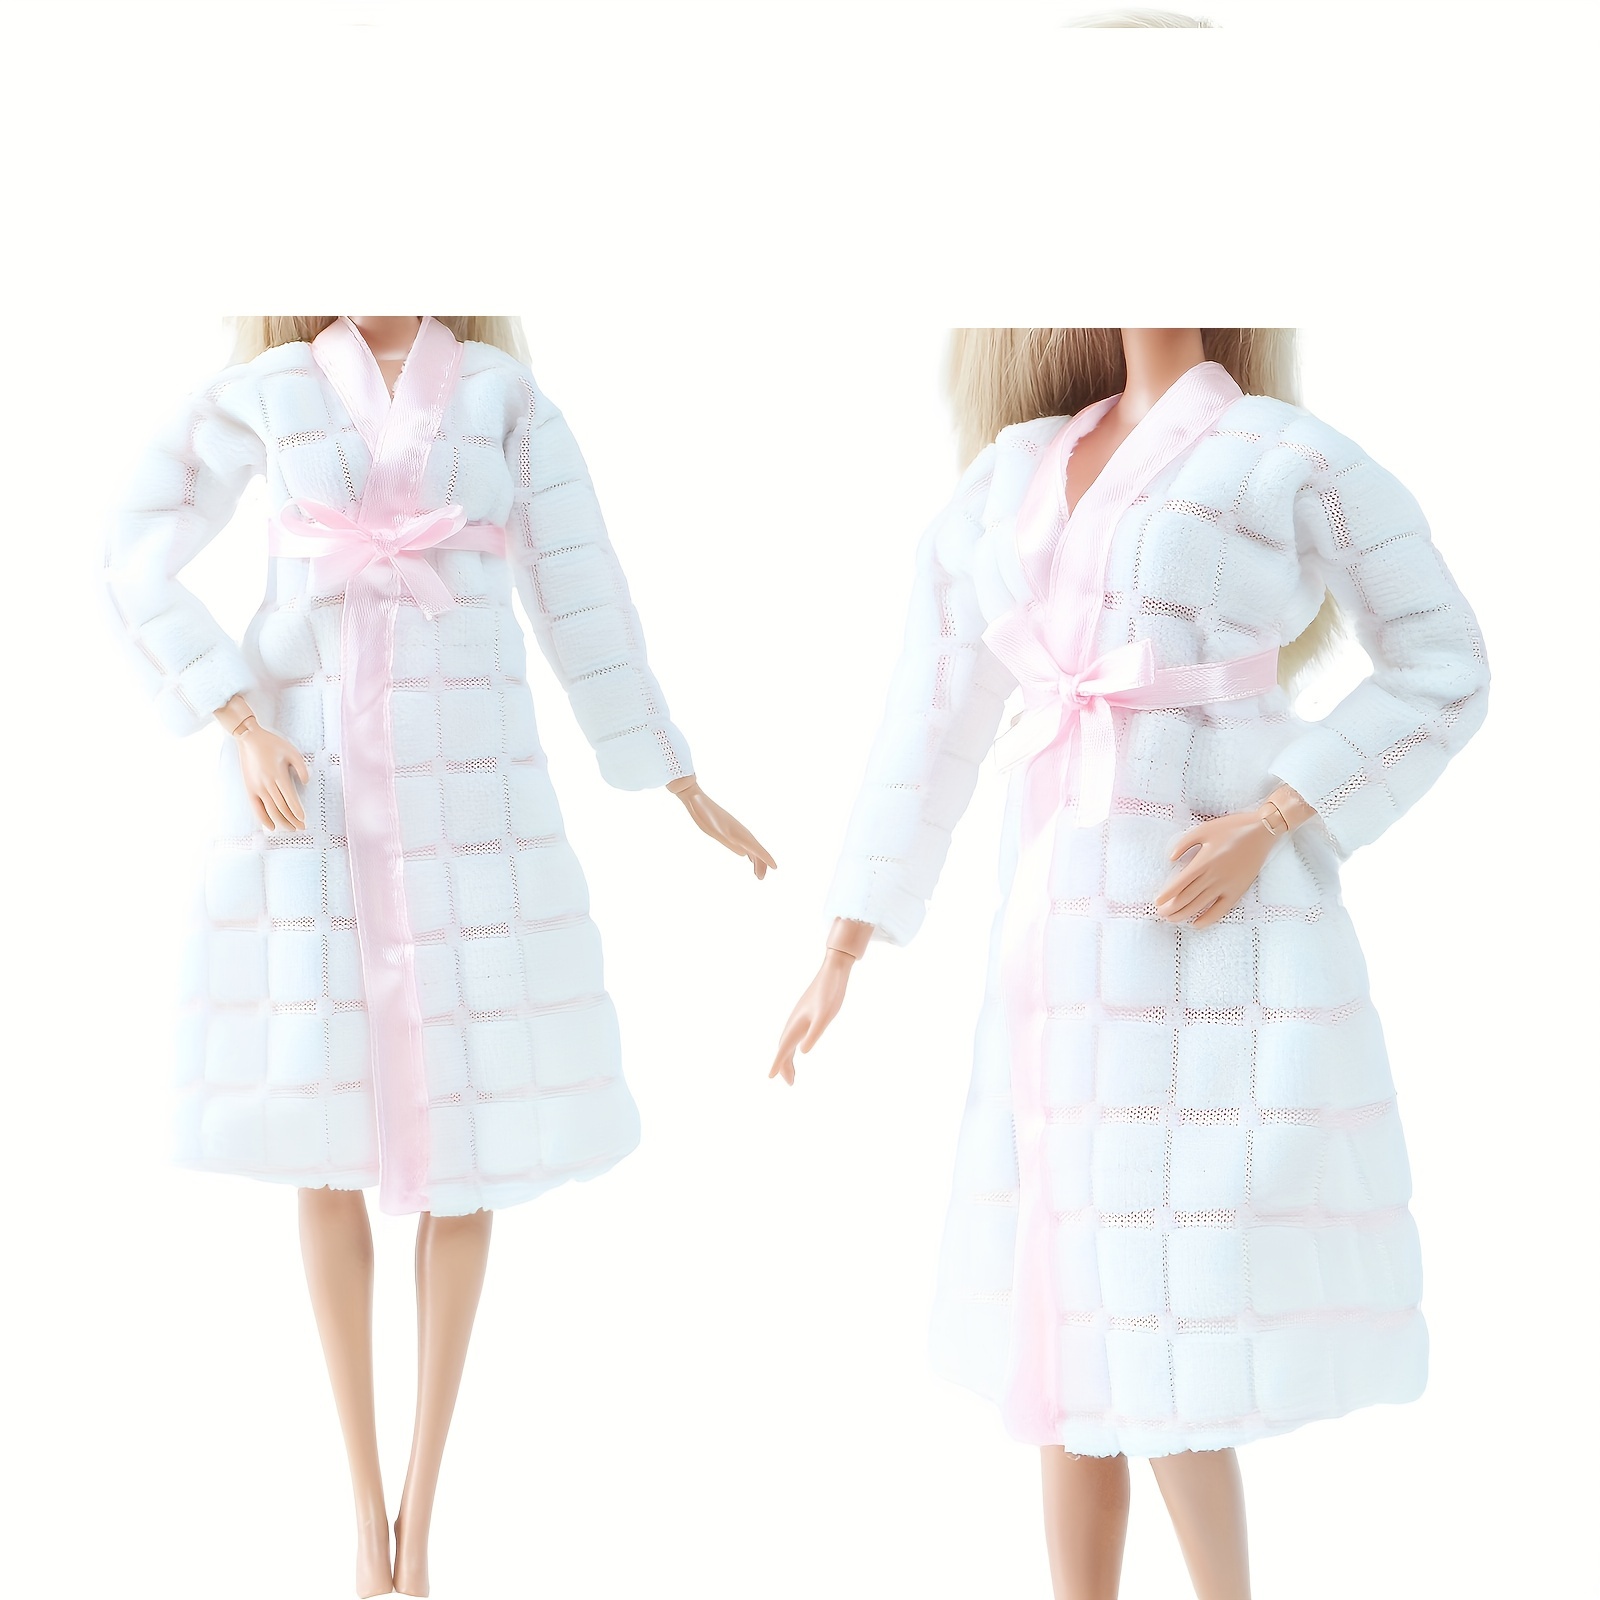 

1 Set White Outfit Bathrobe, Homewear Daily Bathing Wear Accessories Clothes For 30cm/11.8inch Doll, Dollhouse Toy For Girl, Christmas Gift, Not Included Doll